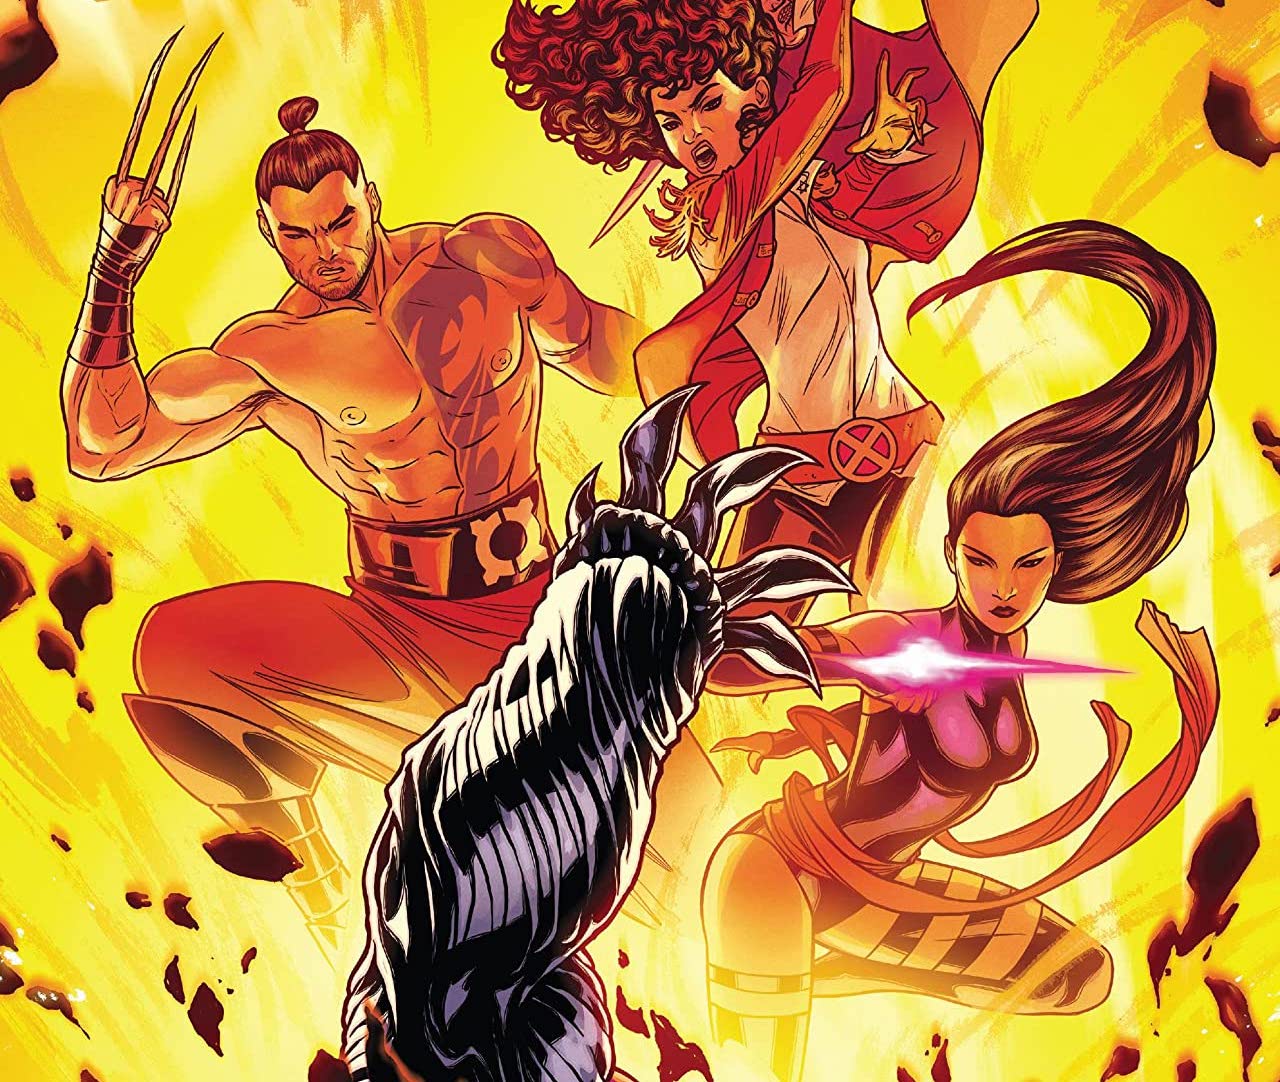 'Marauders Annual' #1 sets up a new era for the team